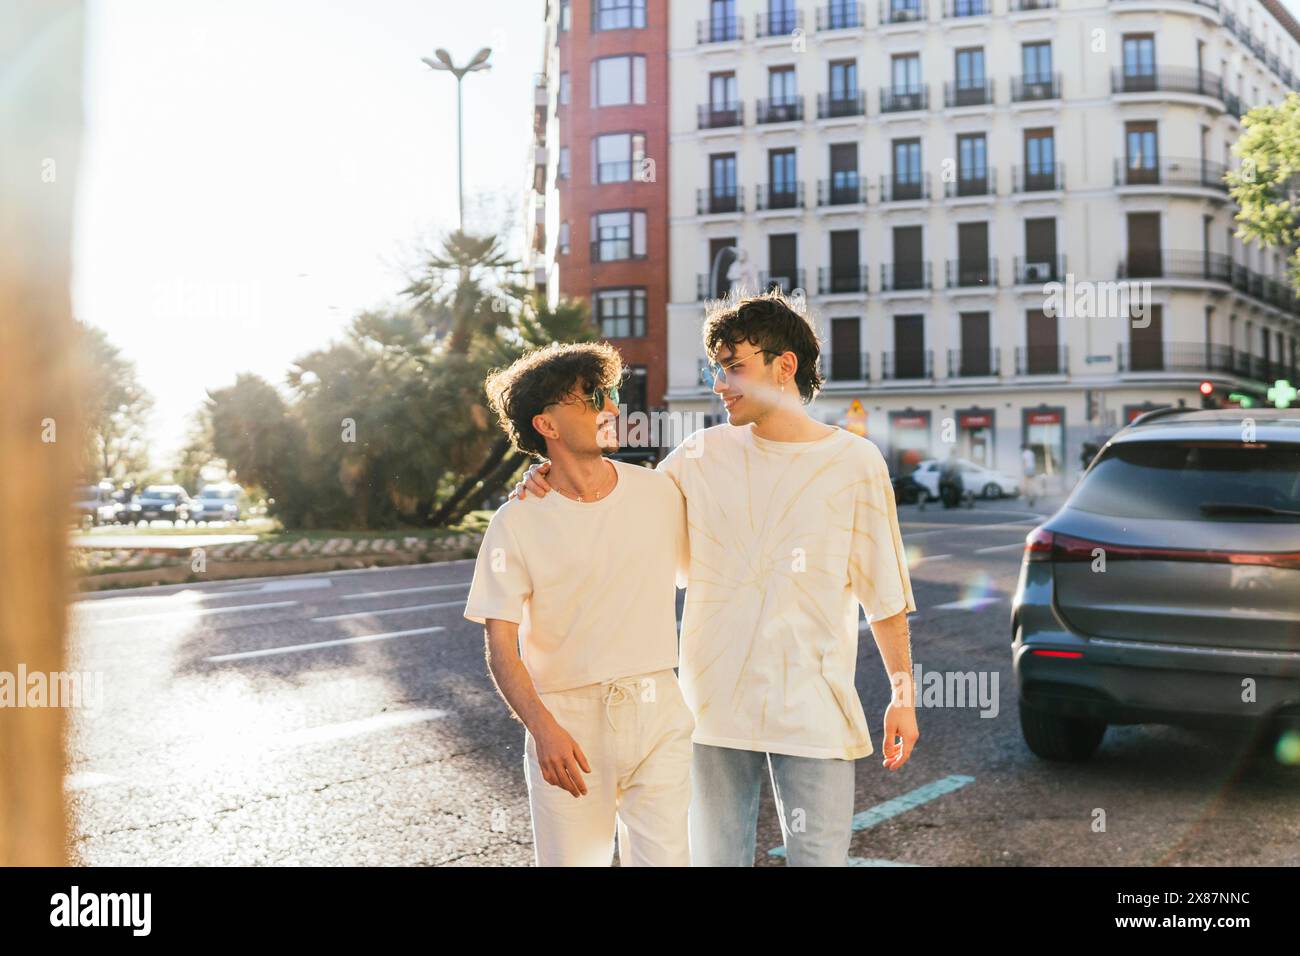 Young gay couple walking with arms around on street Stock Photo